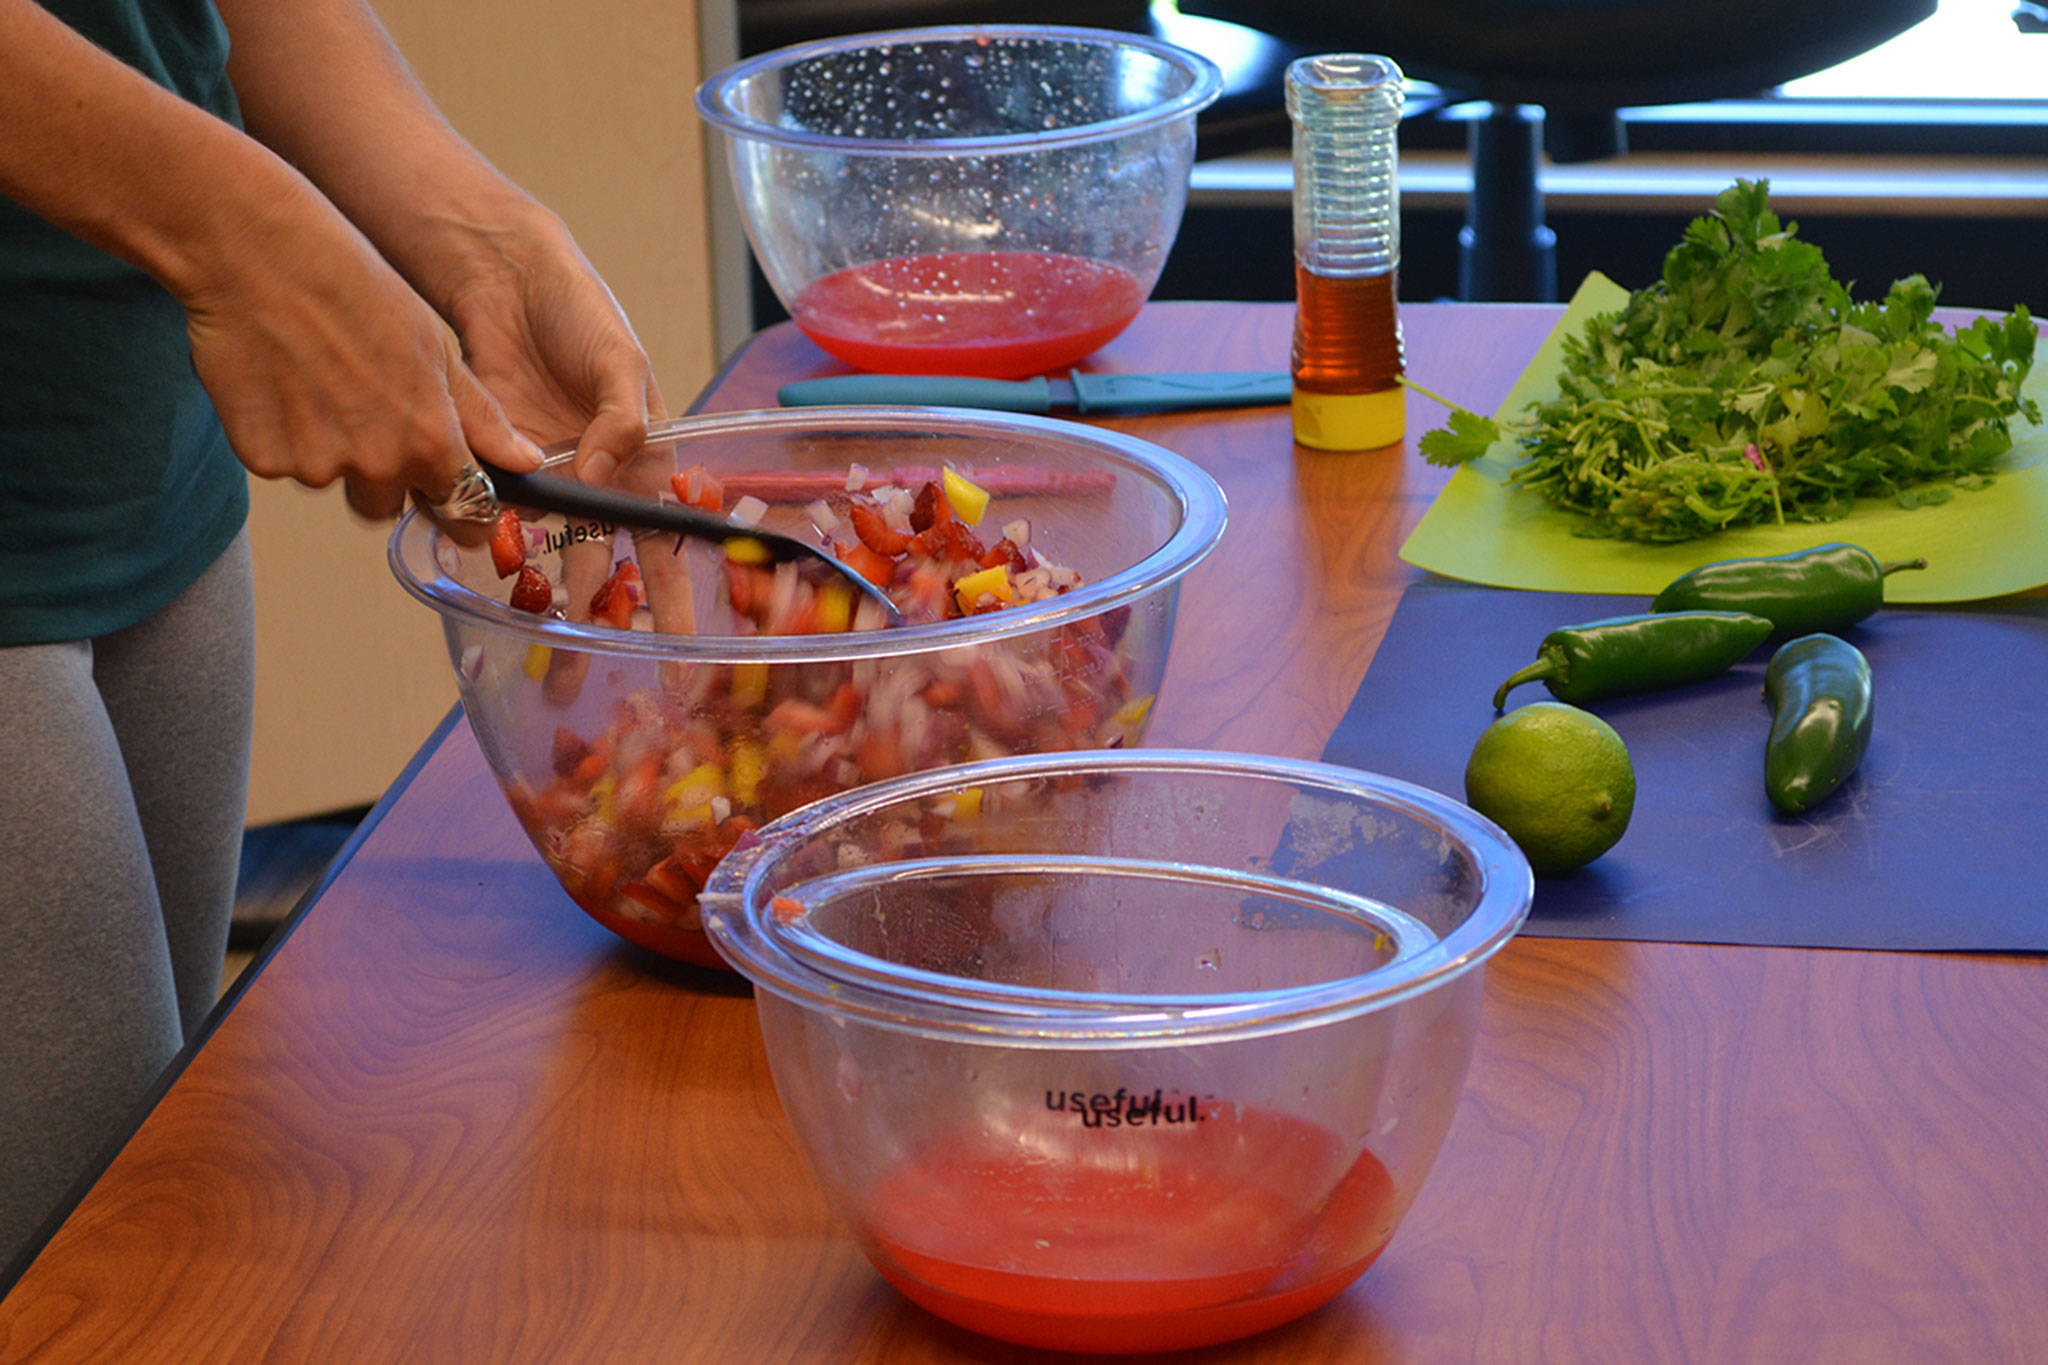 Tulalips nutritionist teaches healthy options